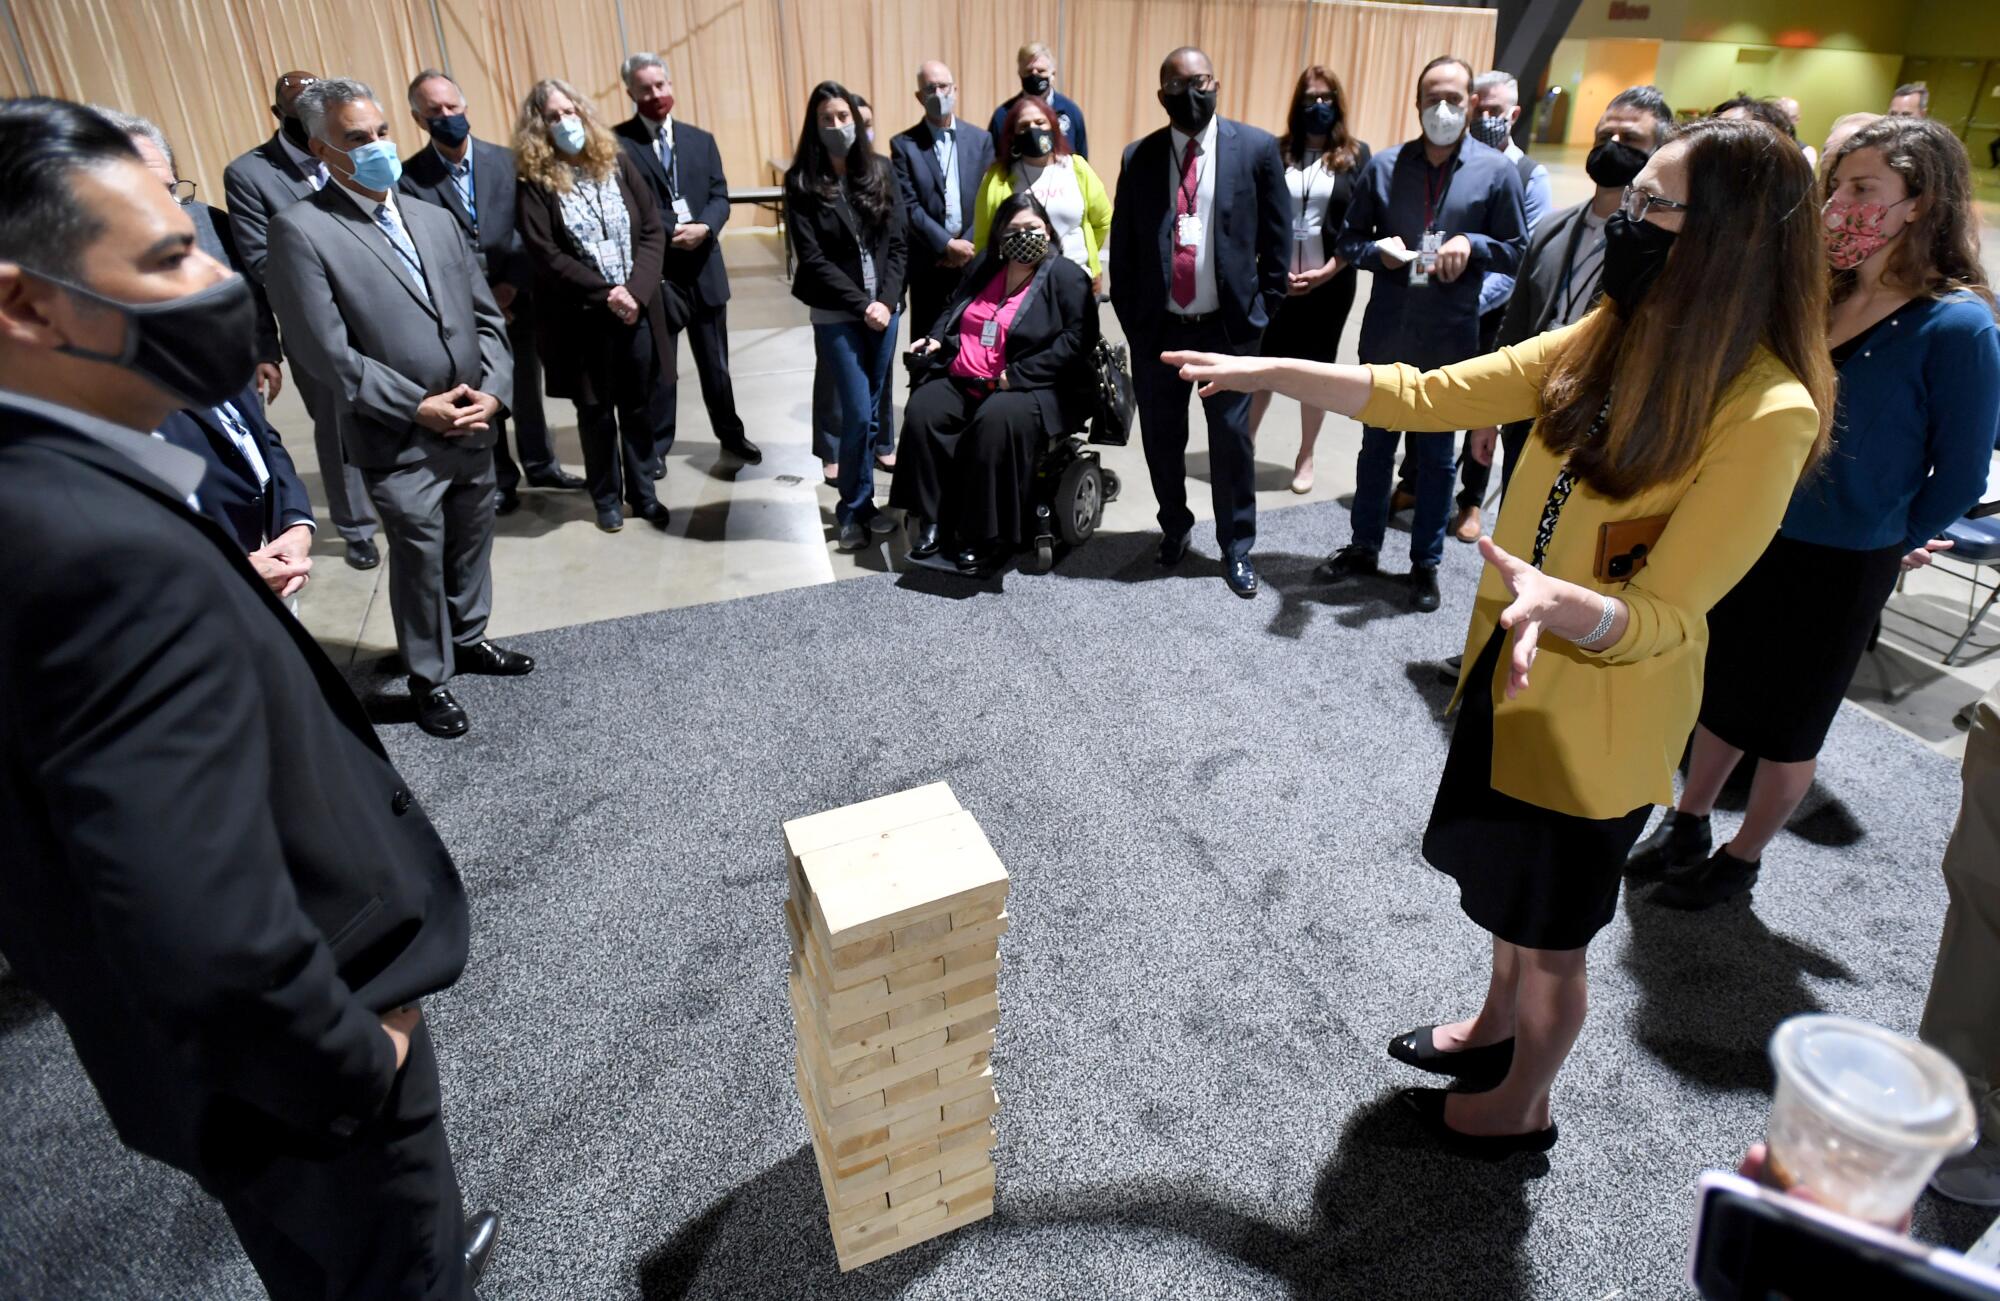 A woman speaks to a crowd of officials next to a large set of Jenga blocks